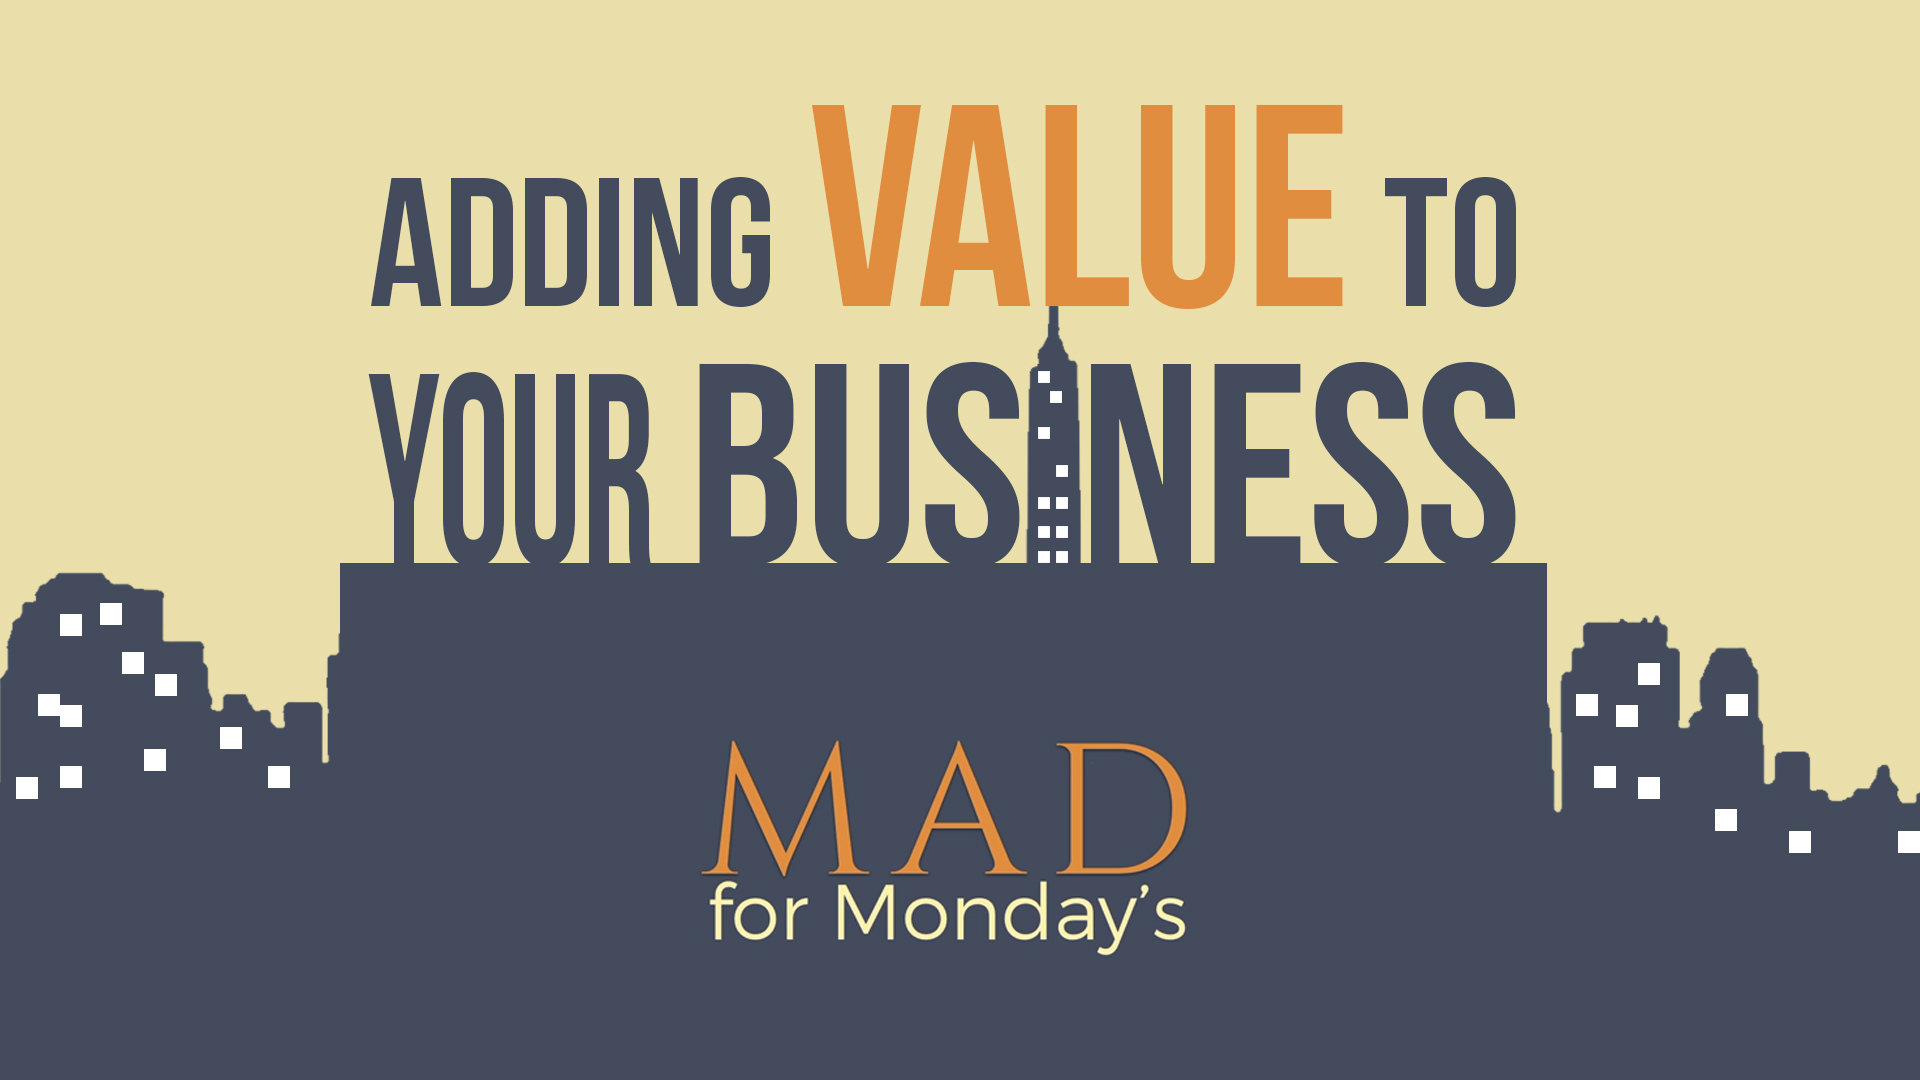 MAD for Monday’s – Adding Value to your Business